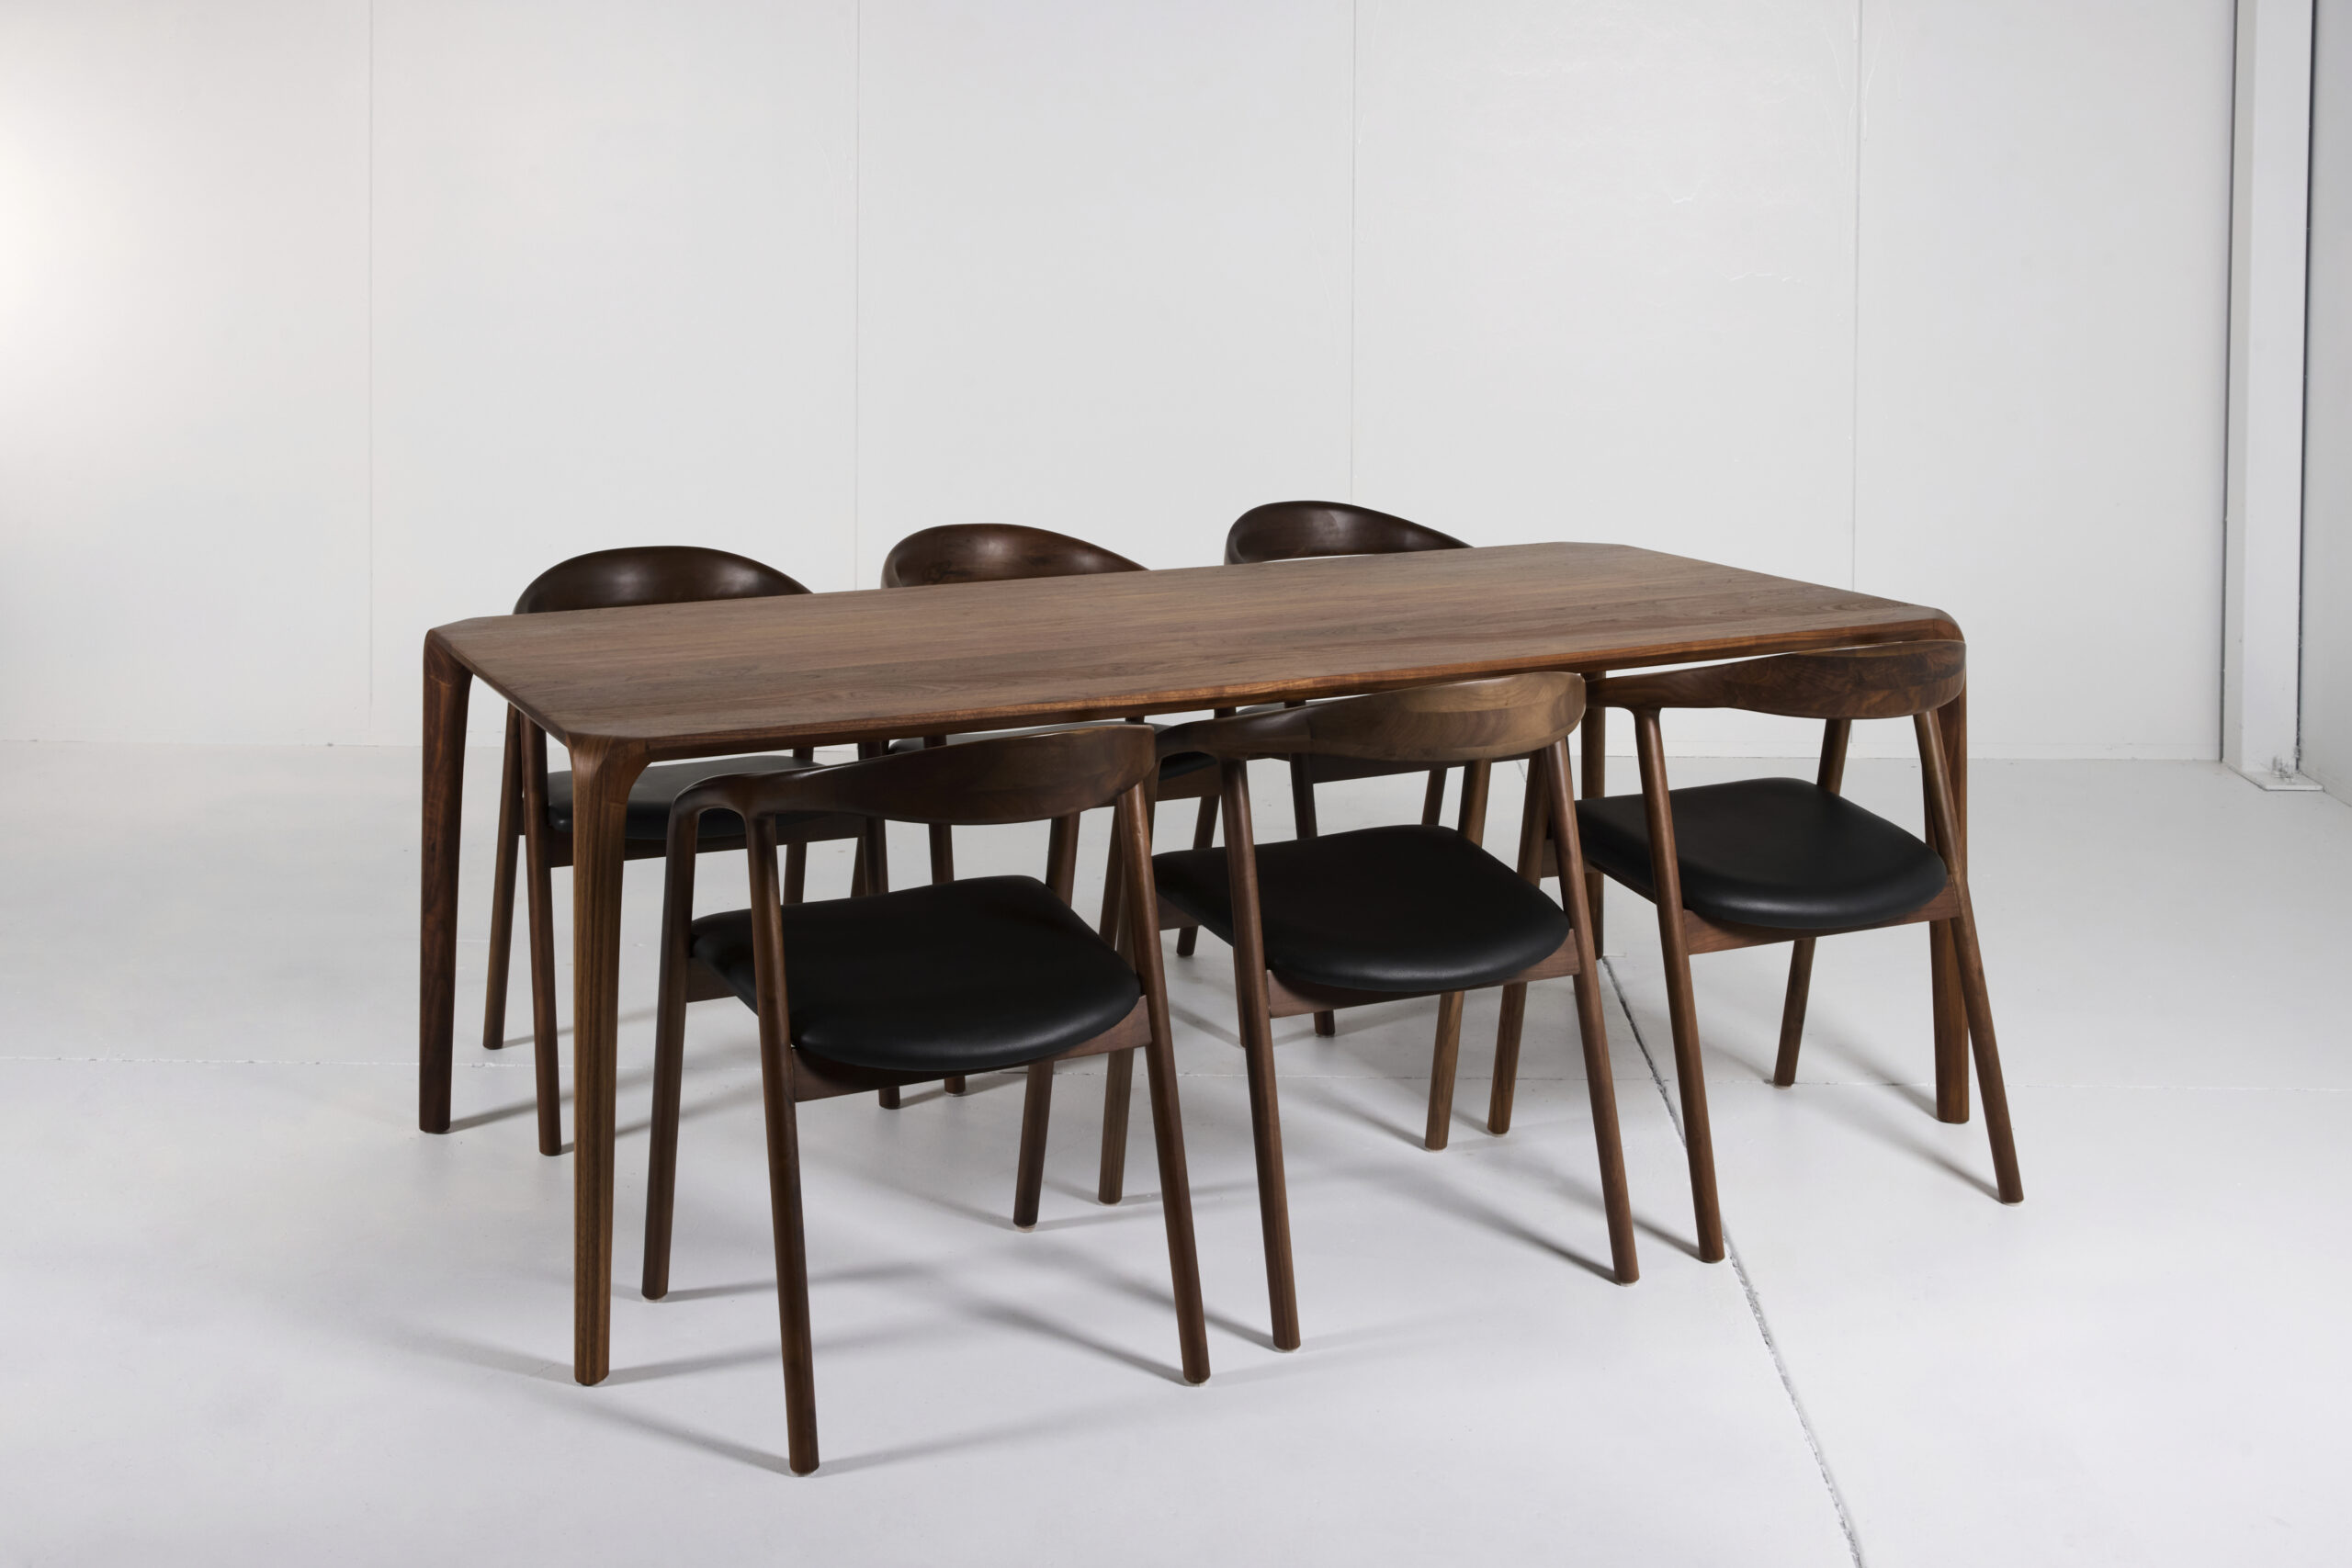 Sara Dining Table - The Sara Leg base not only provides stability but also adds an elegant touch, enhancing the overall aesthetic appeal of the table. Experience sophistication and charm with this beautifully crafted dining table by Arranmore Furniture.